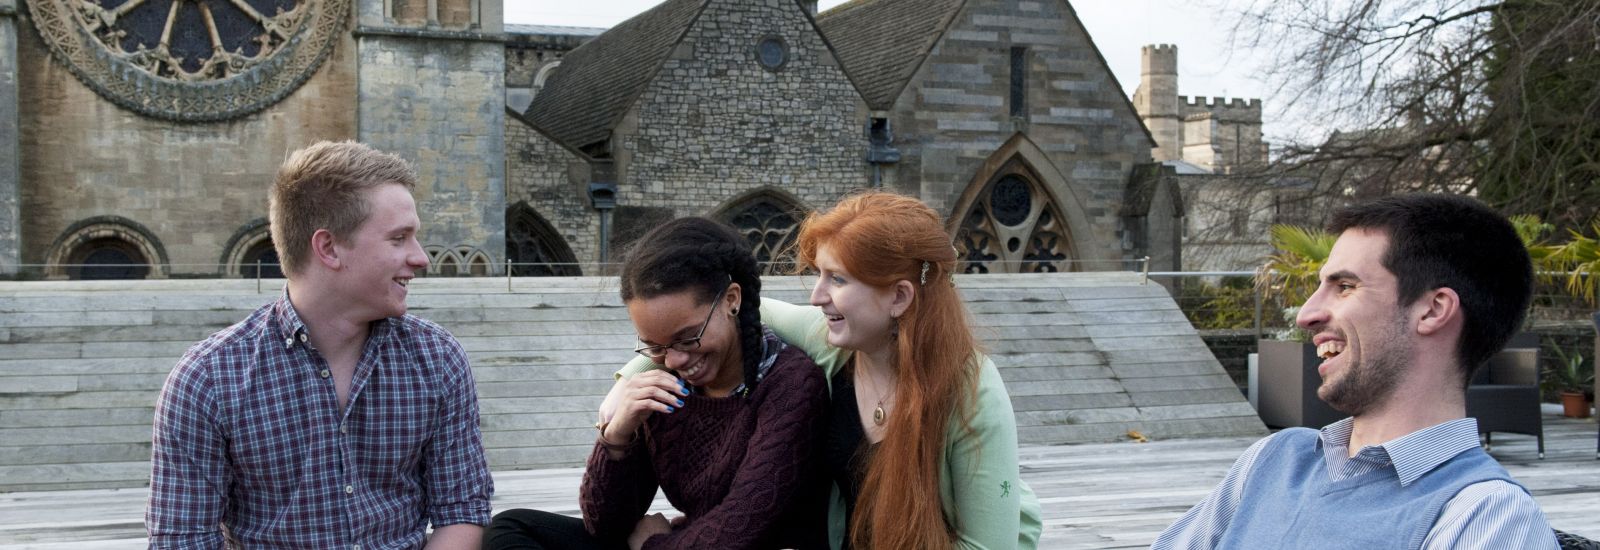 Oxford-University-Fully-Funded-Scholarships-for-Developing-Countries